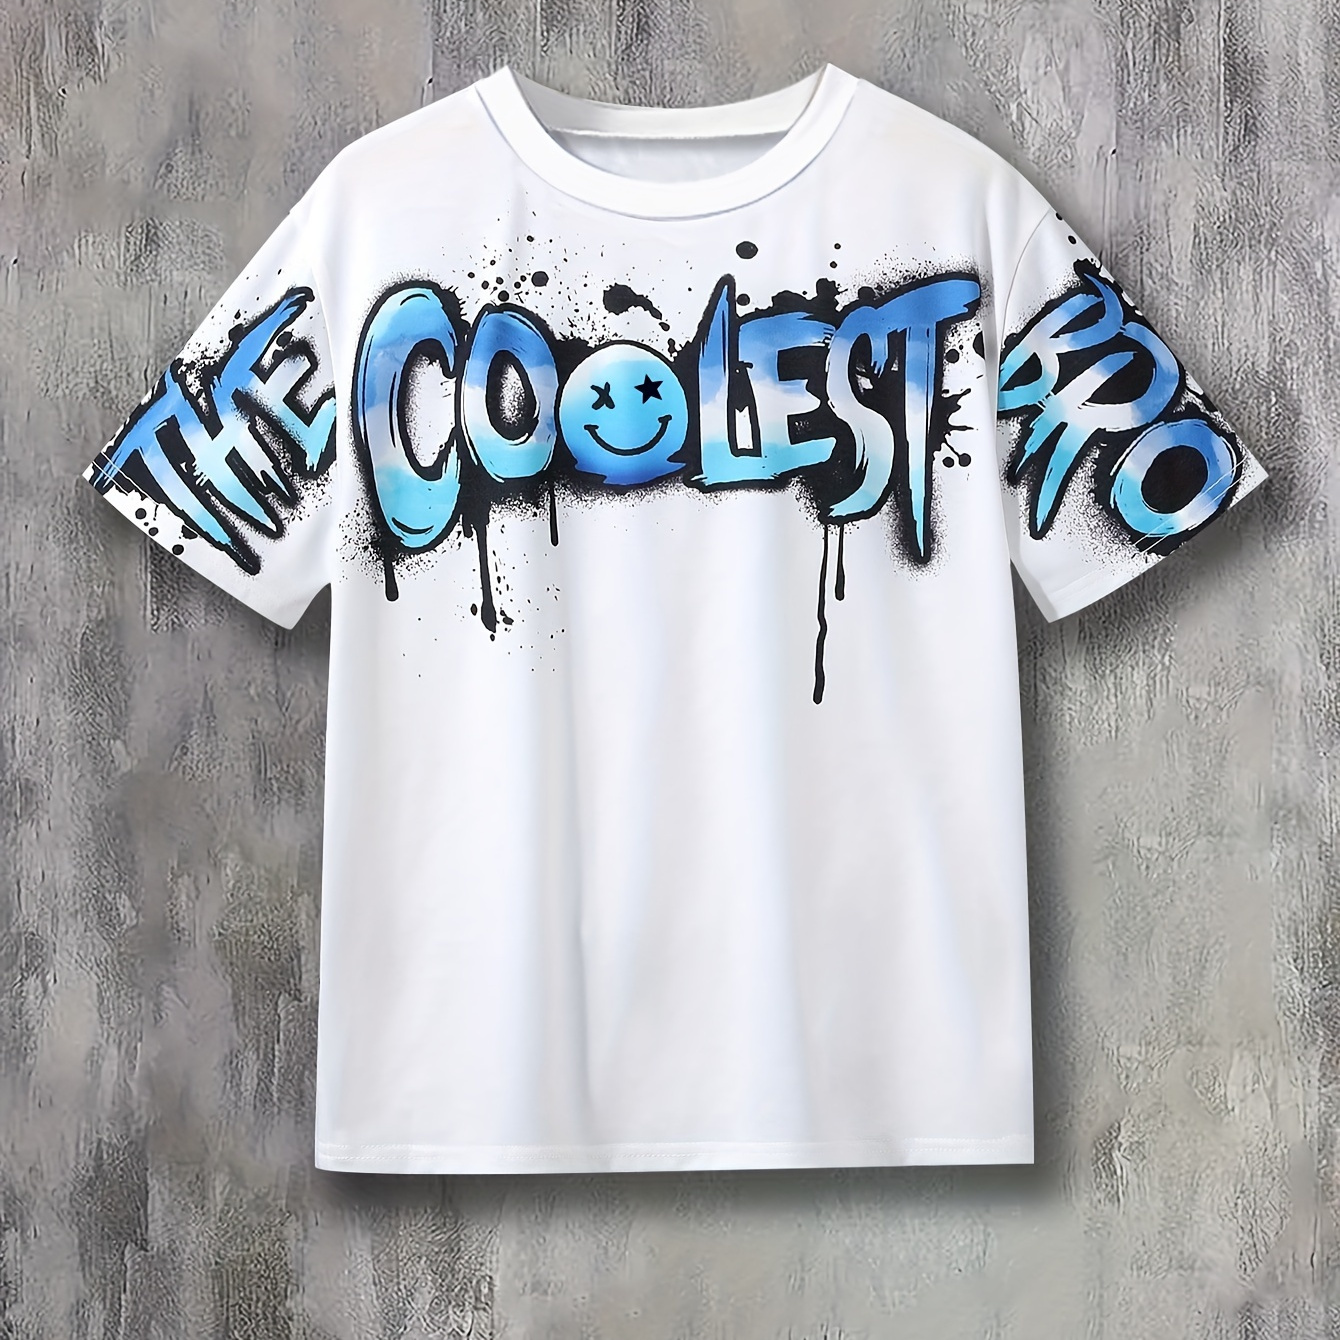 

Graffiti Letters Print Short Sleeve Crew Neck T-shirt For Boys, Casual Breathable Tee Versatile Top Summer Gift